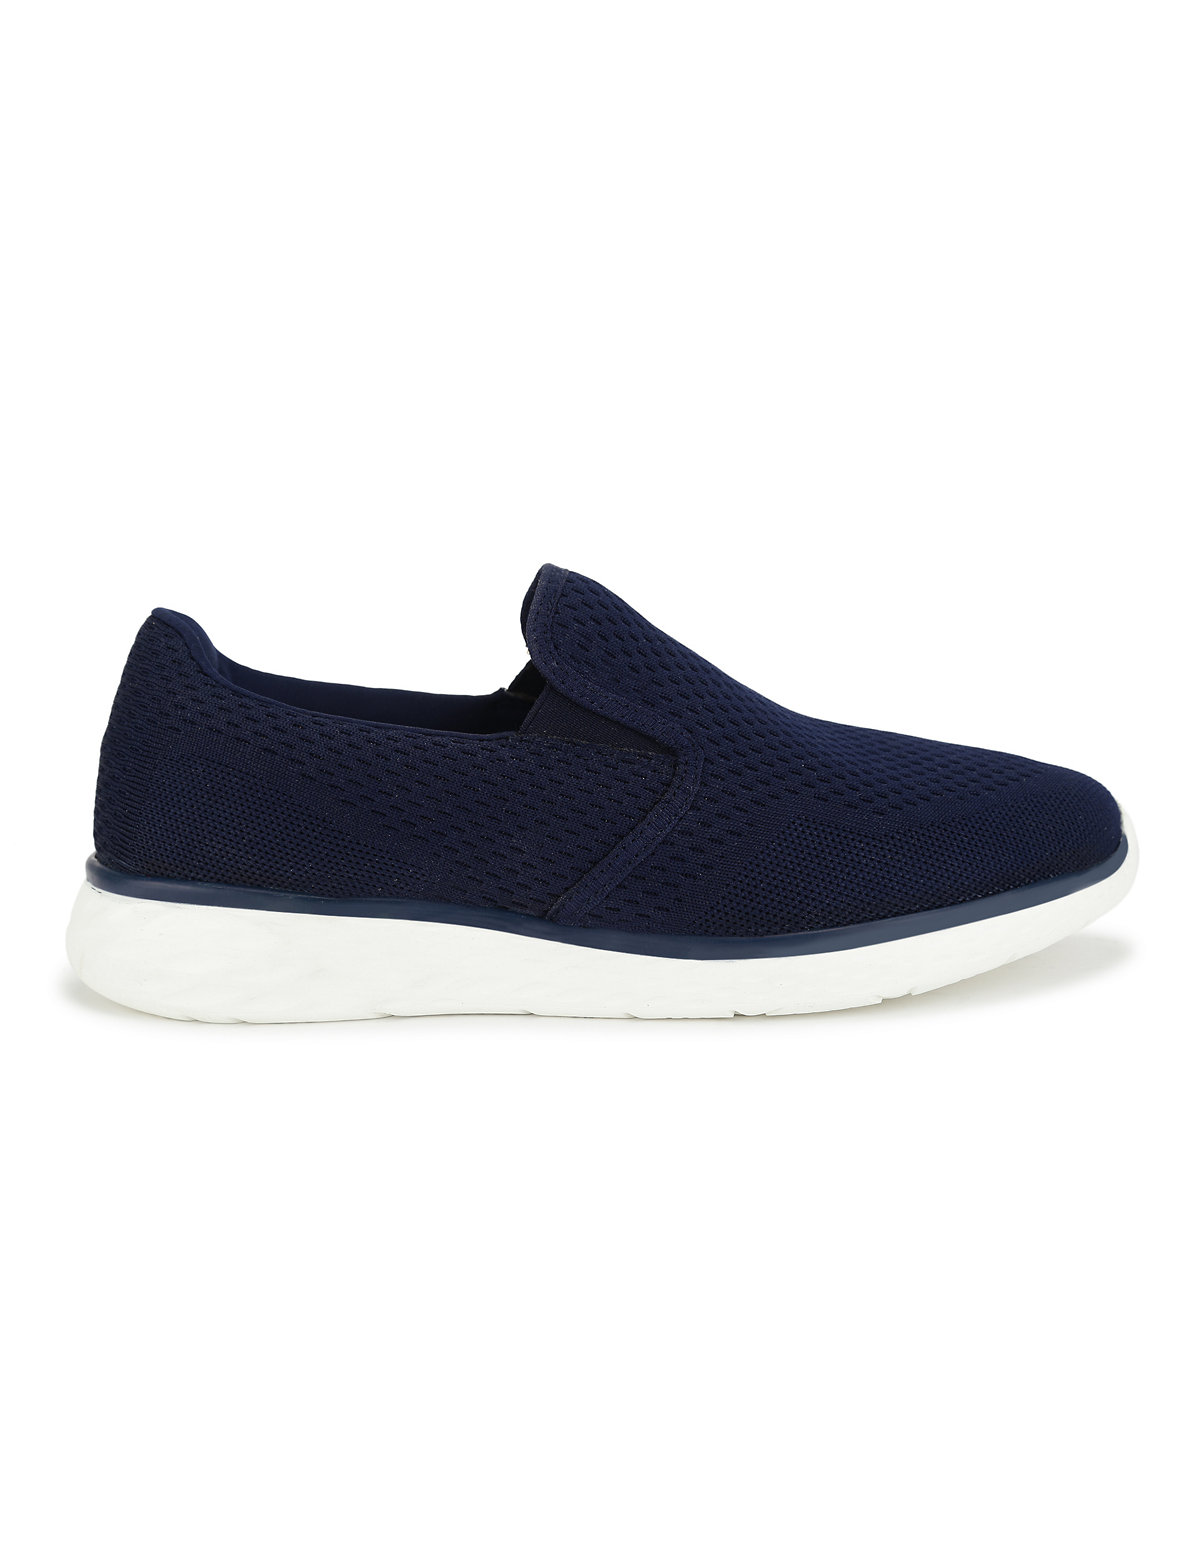 Mesh Textured Standard Fit Casual Shoes